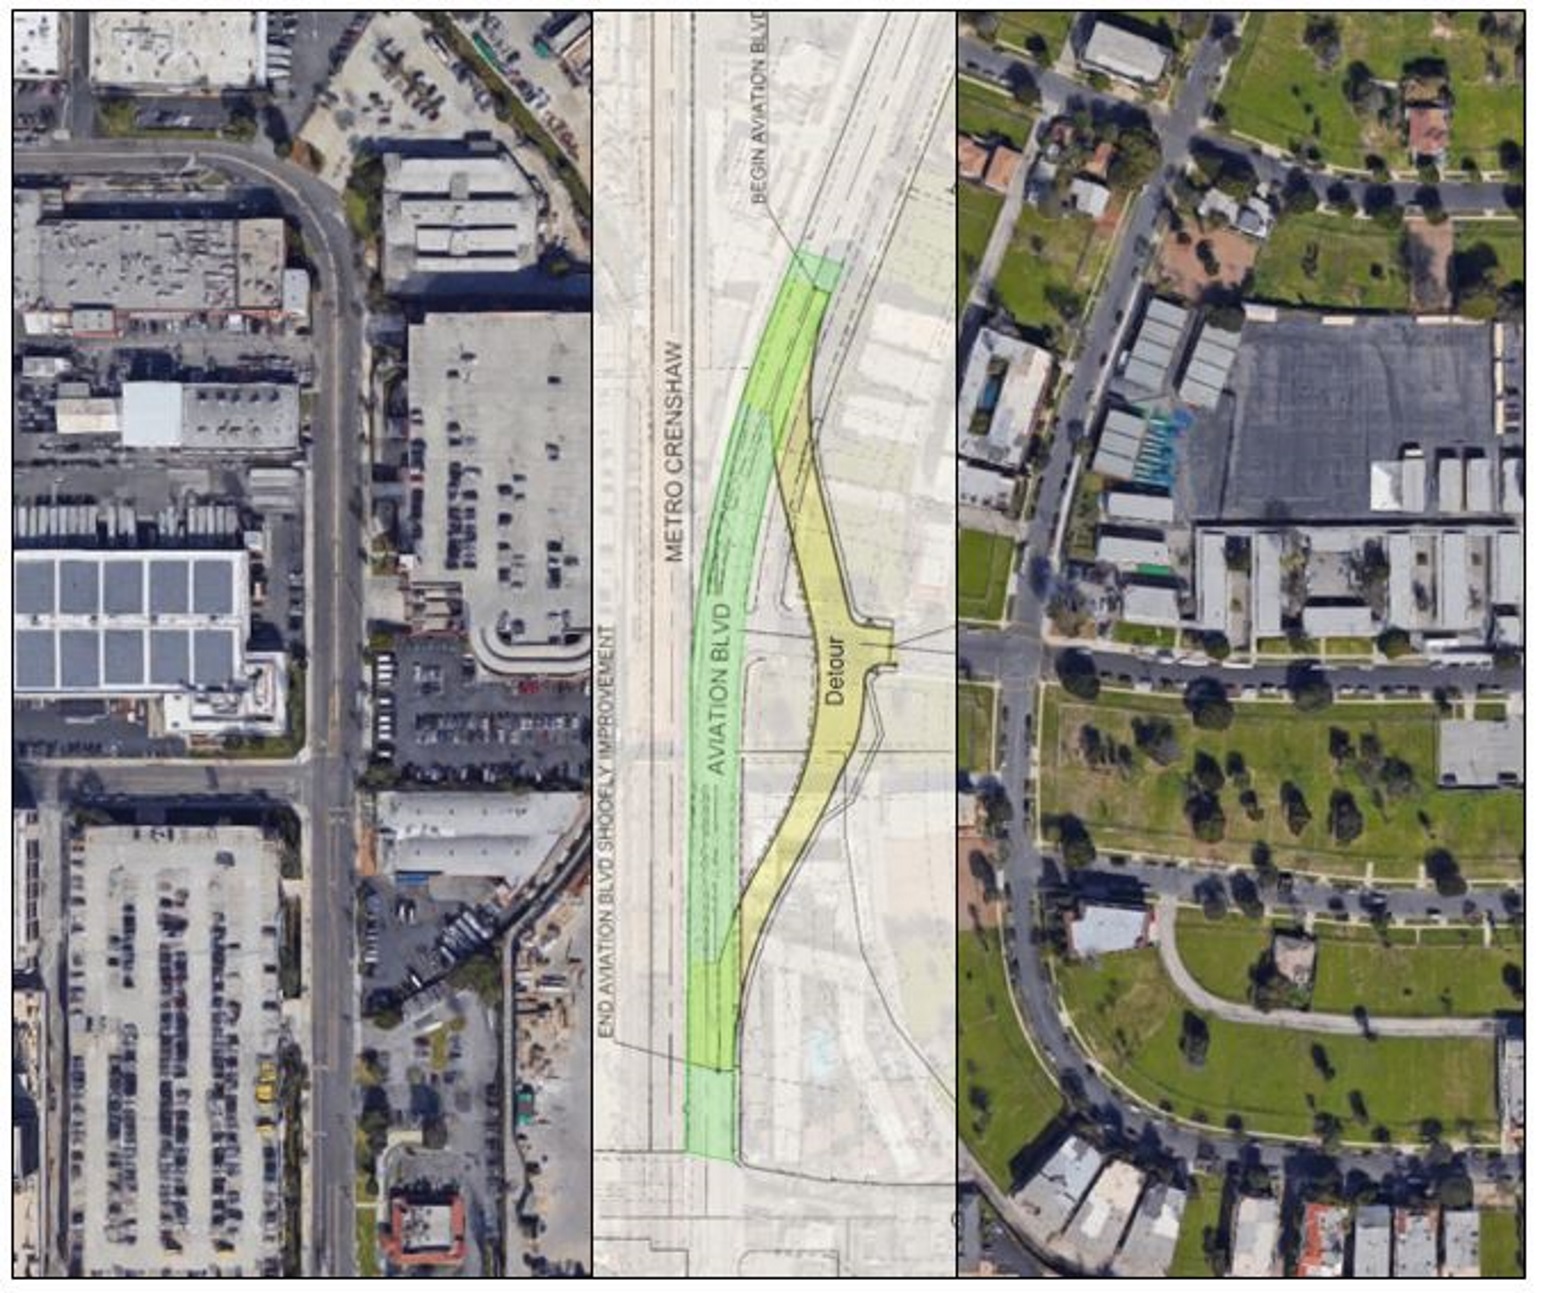 Lane closures and lane shifts will be implemented on Aviation Boulevard between Arbor Vitae Street and Century Boulevard